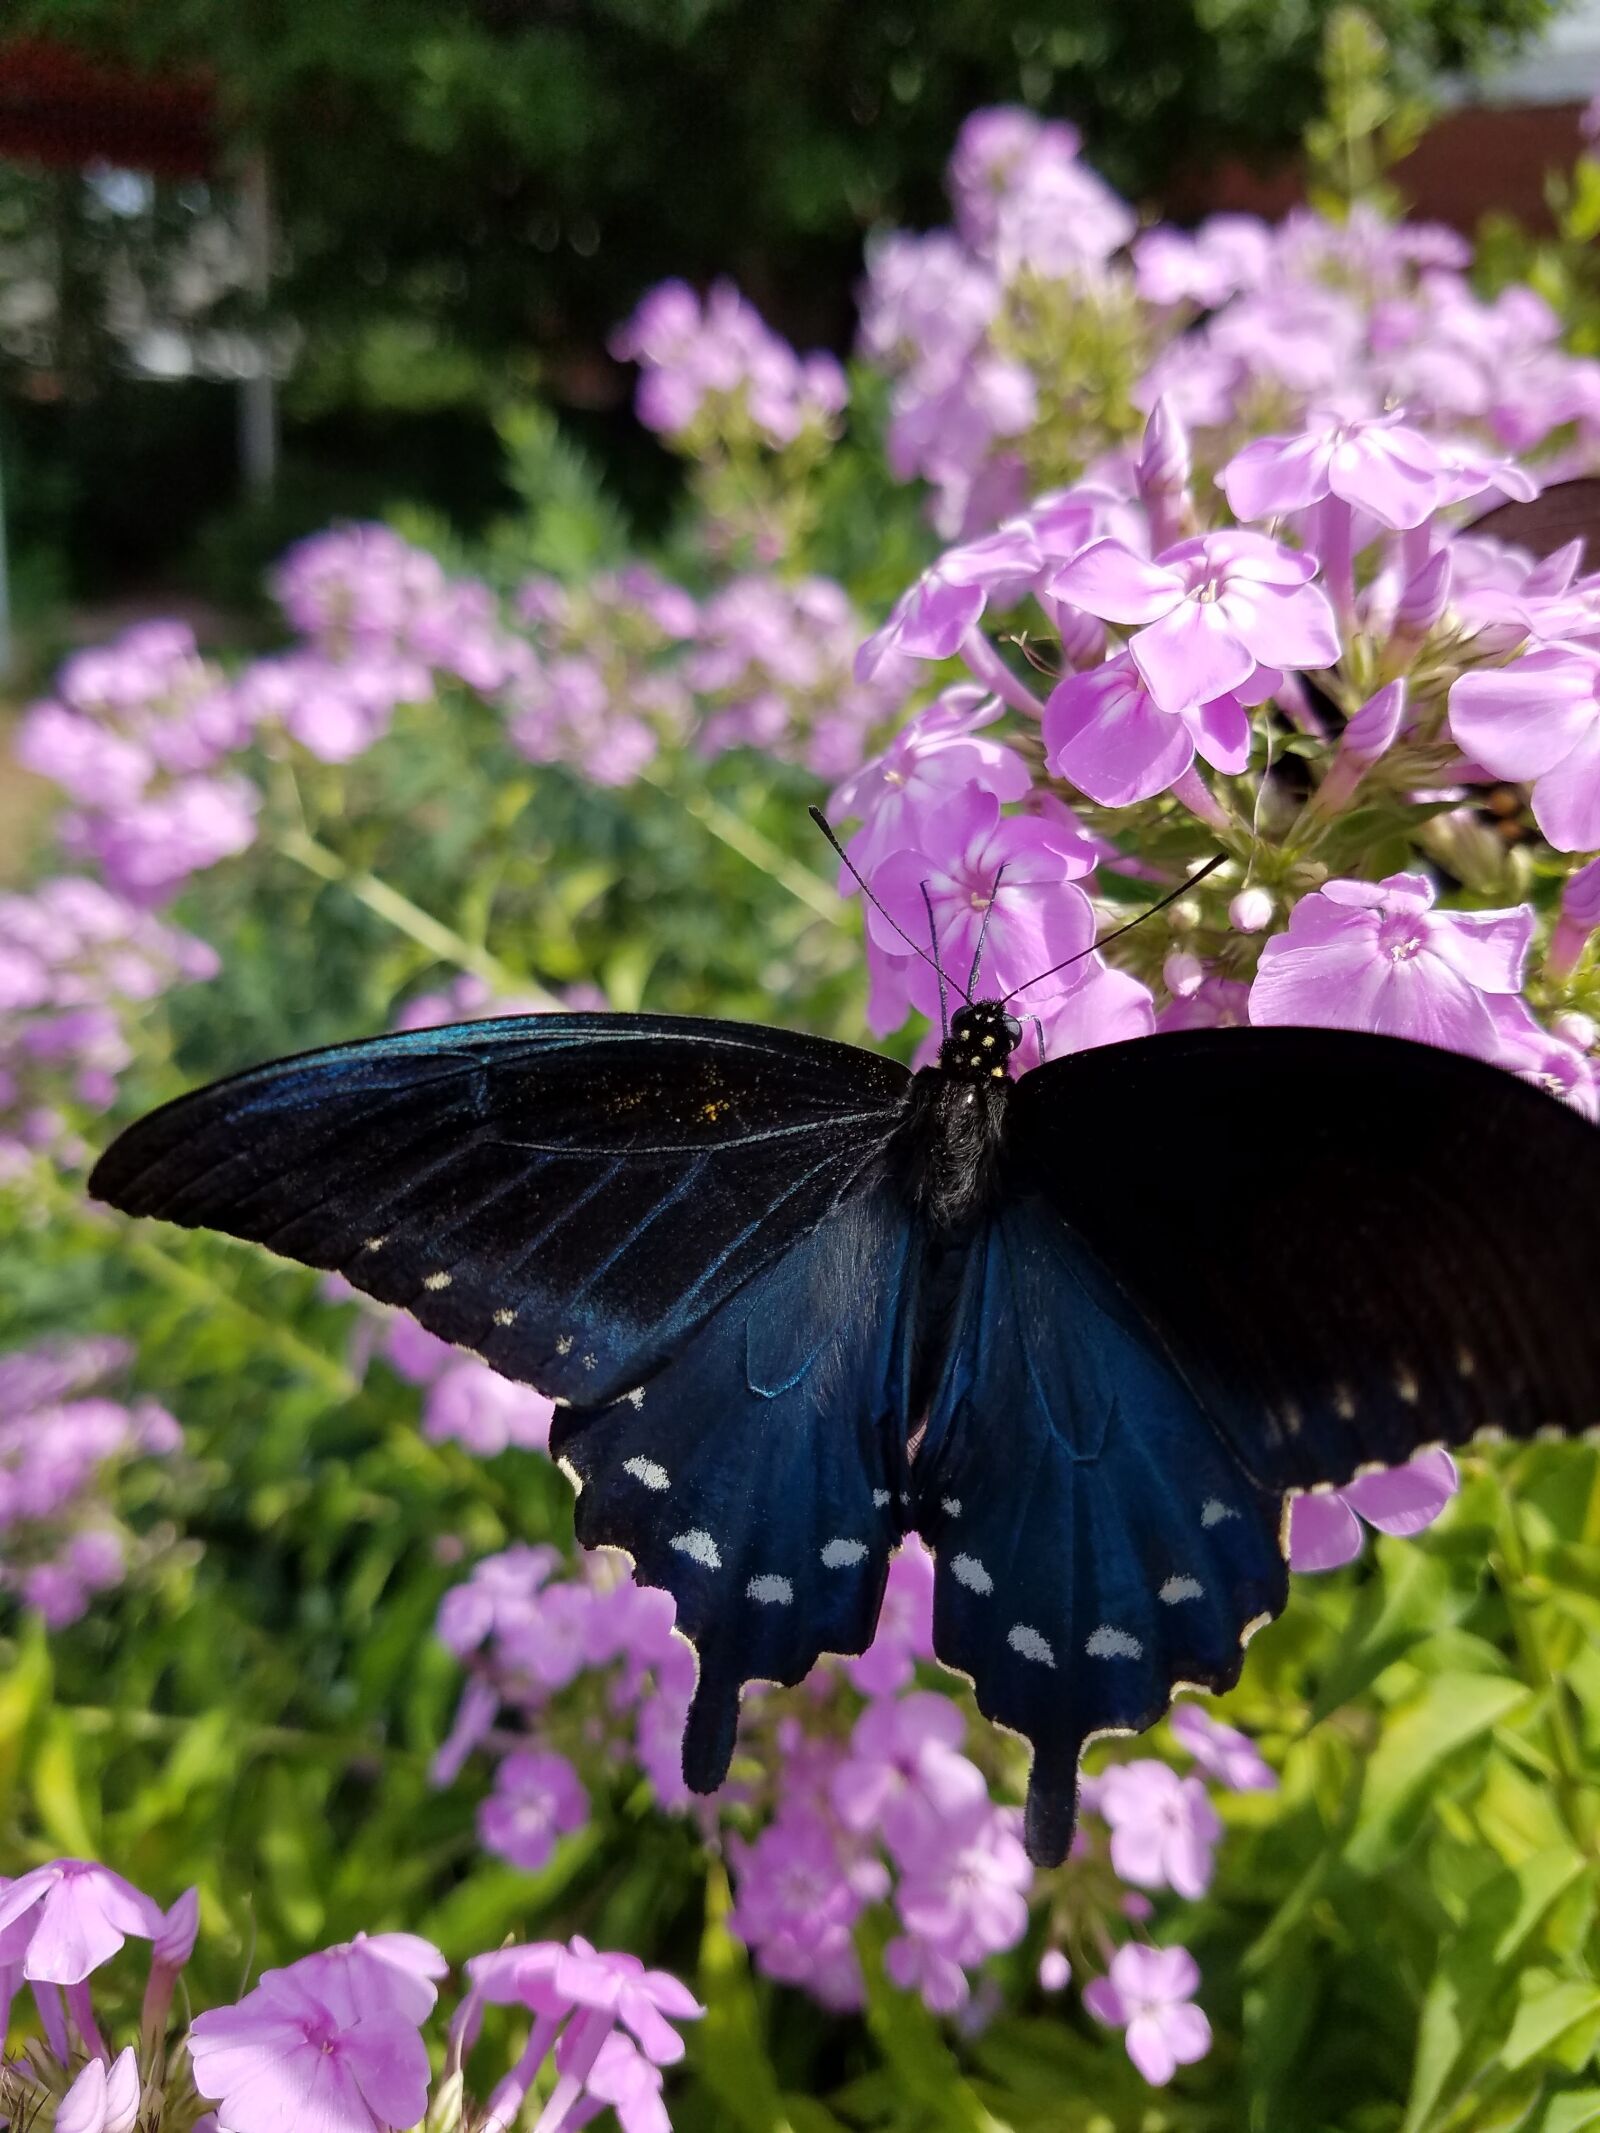 Samsung Galaxy S7 sample photo. Butterfly, flowers, nature photography